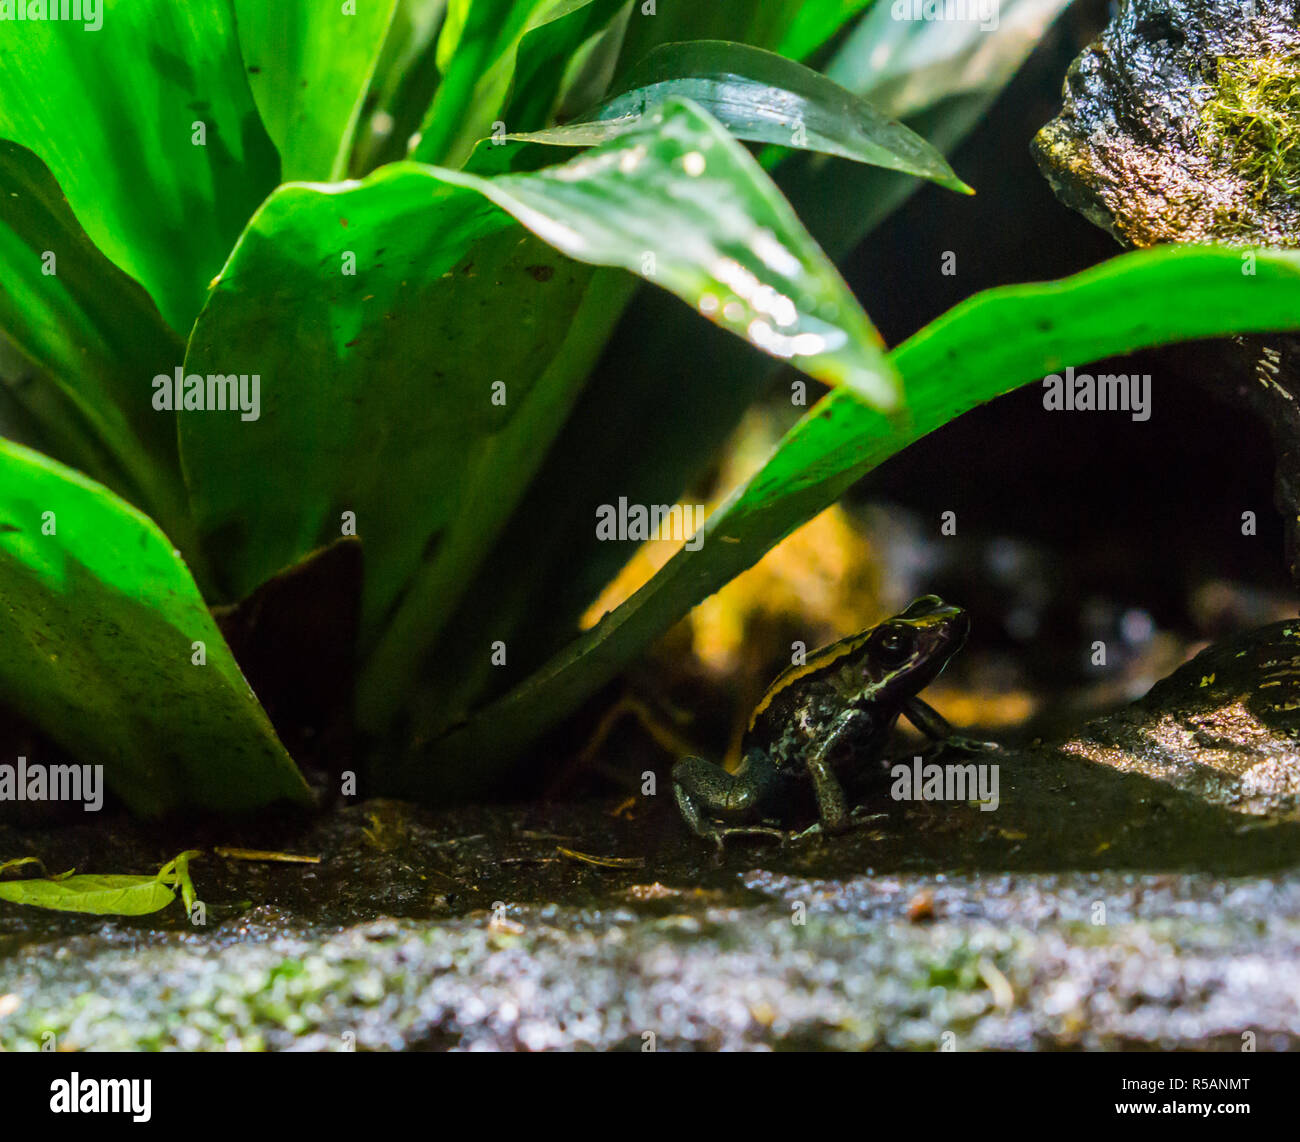 Golfodulcean poison dart frog in close up sitting under a plant, A dangerous and venomous animal specie from Costa Rica Stock Photo